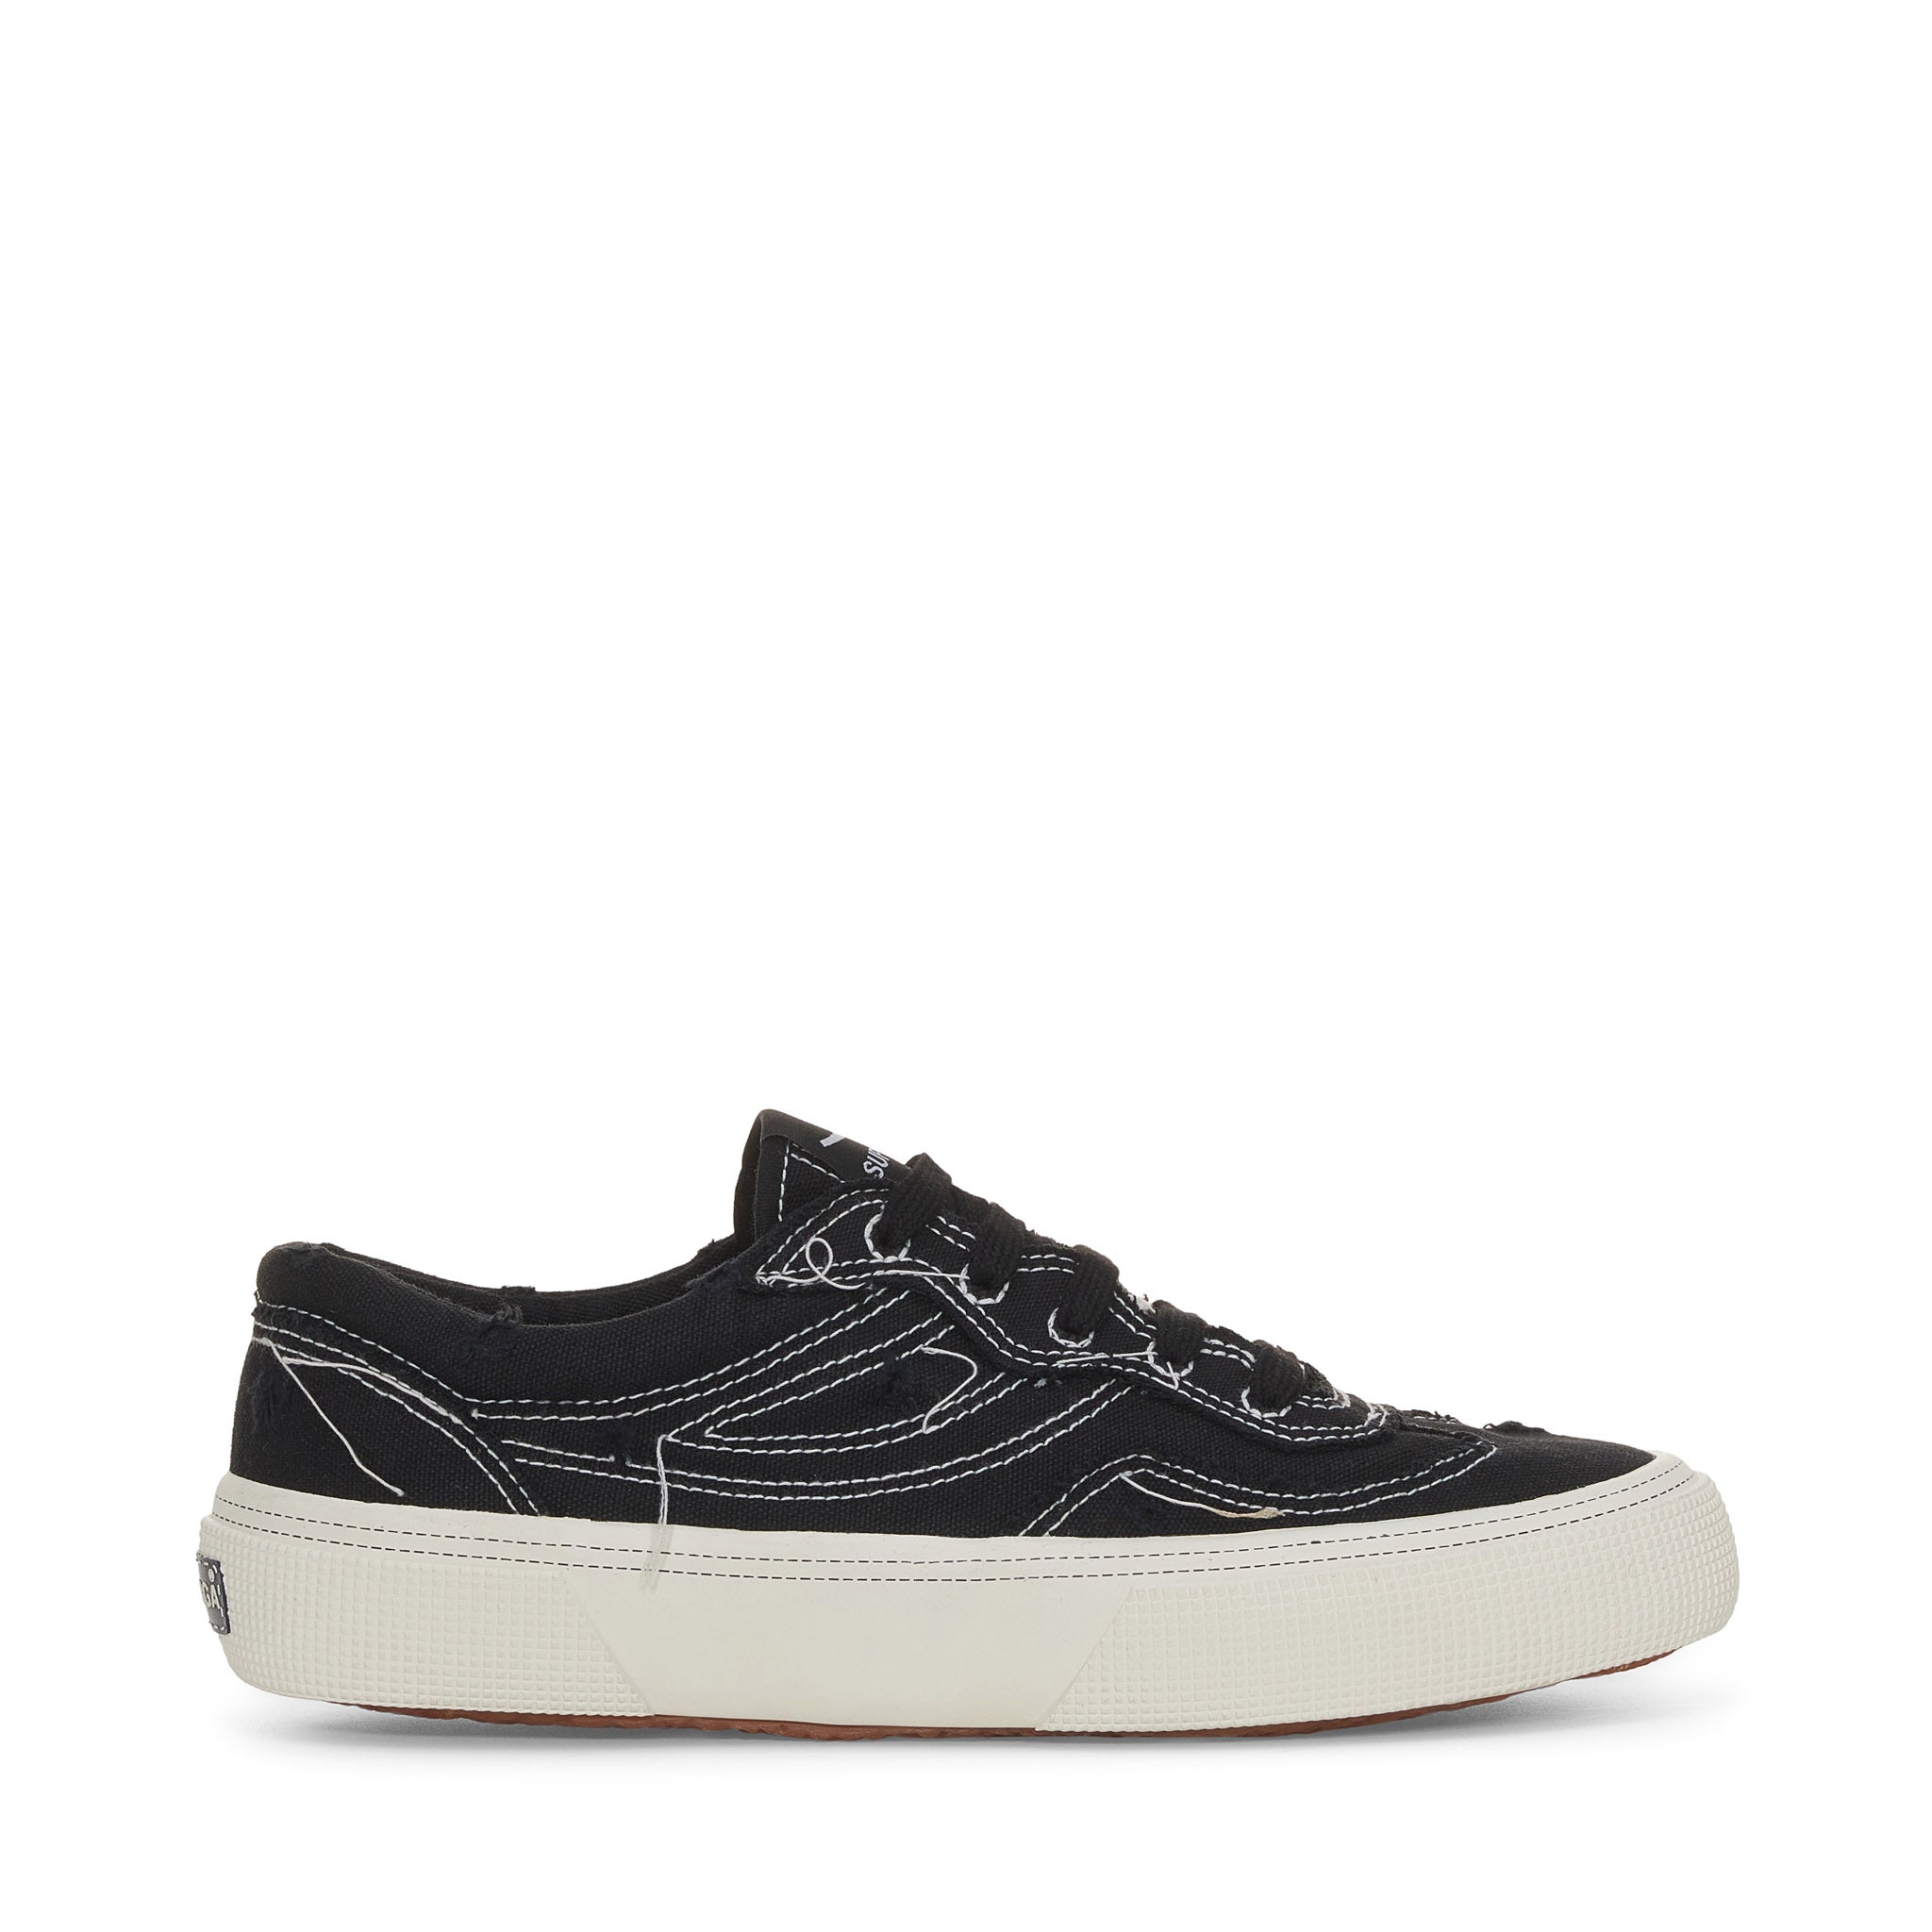 Superga 2941 Revolley Distressed Stone Washed Sneakers - Black White Avorio. Side view.